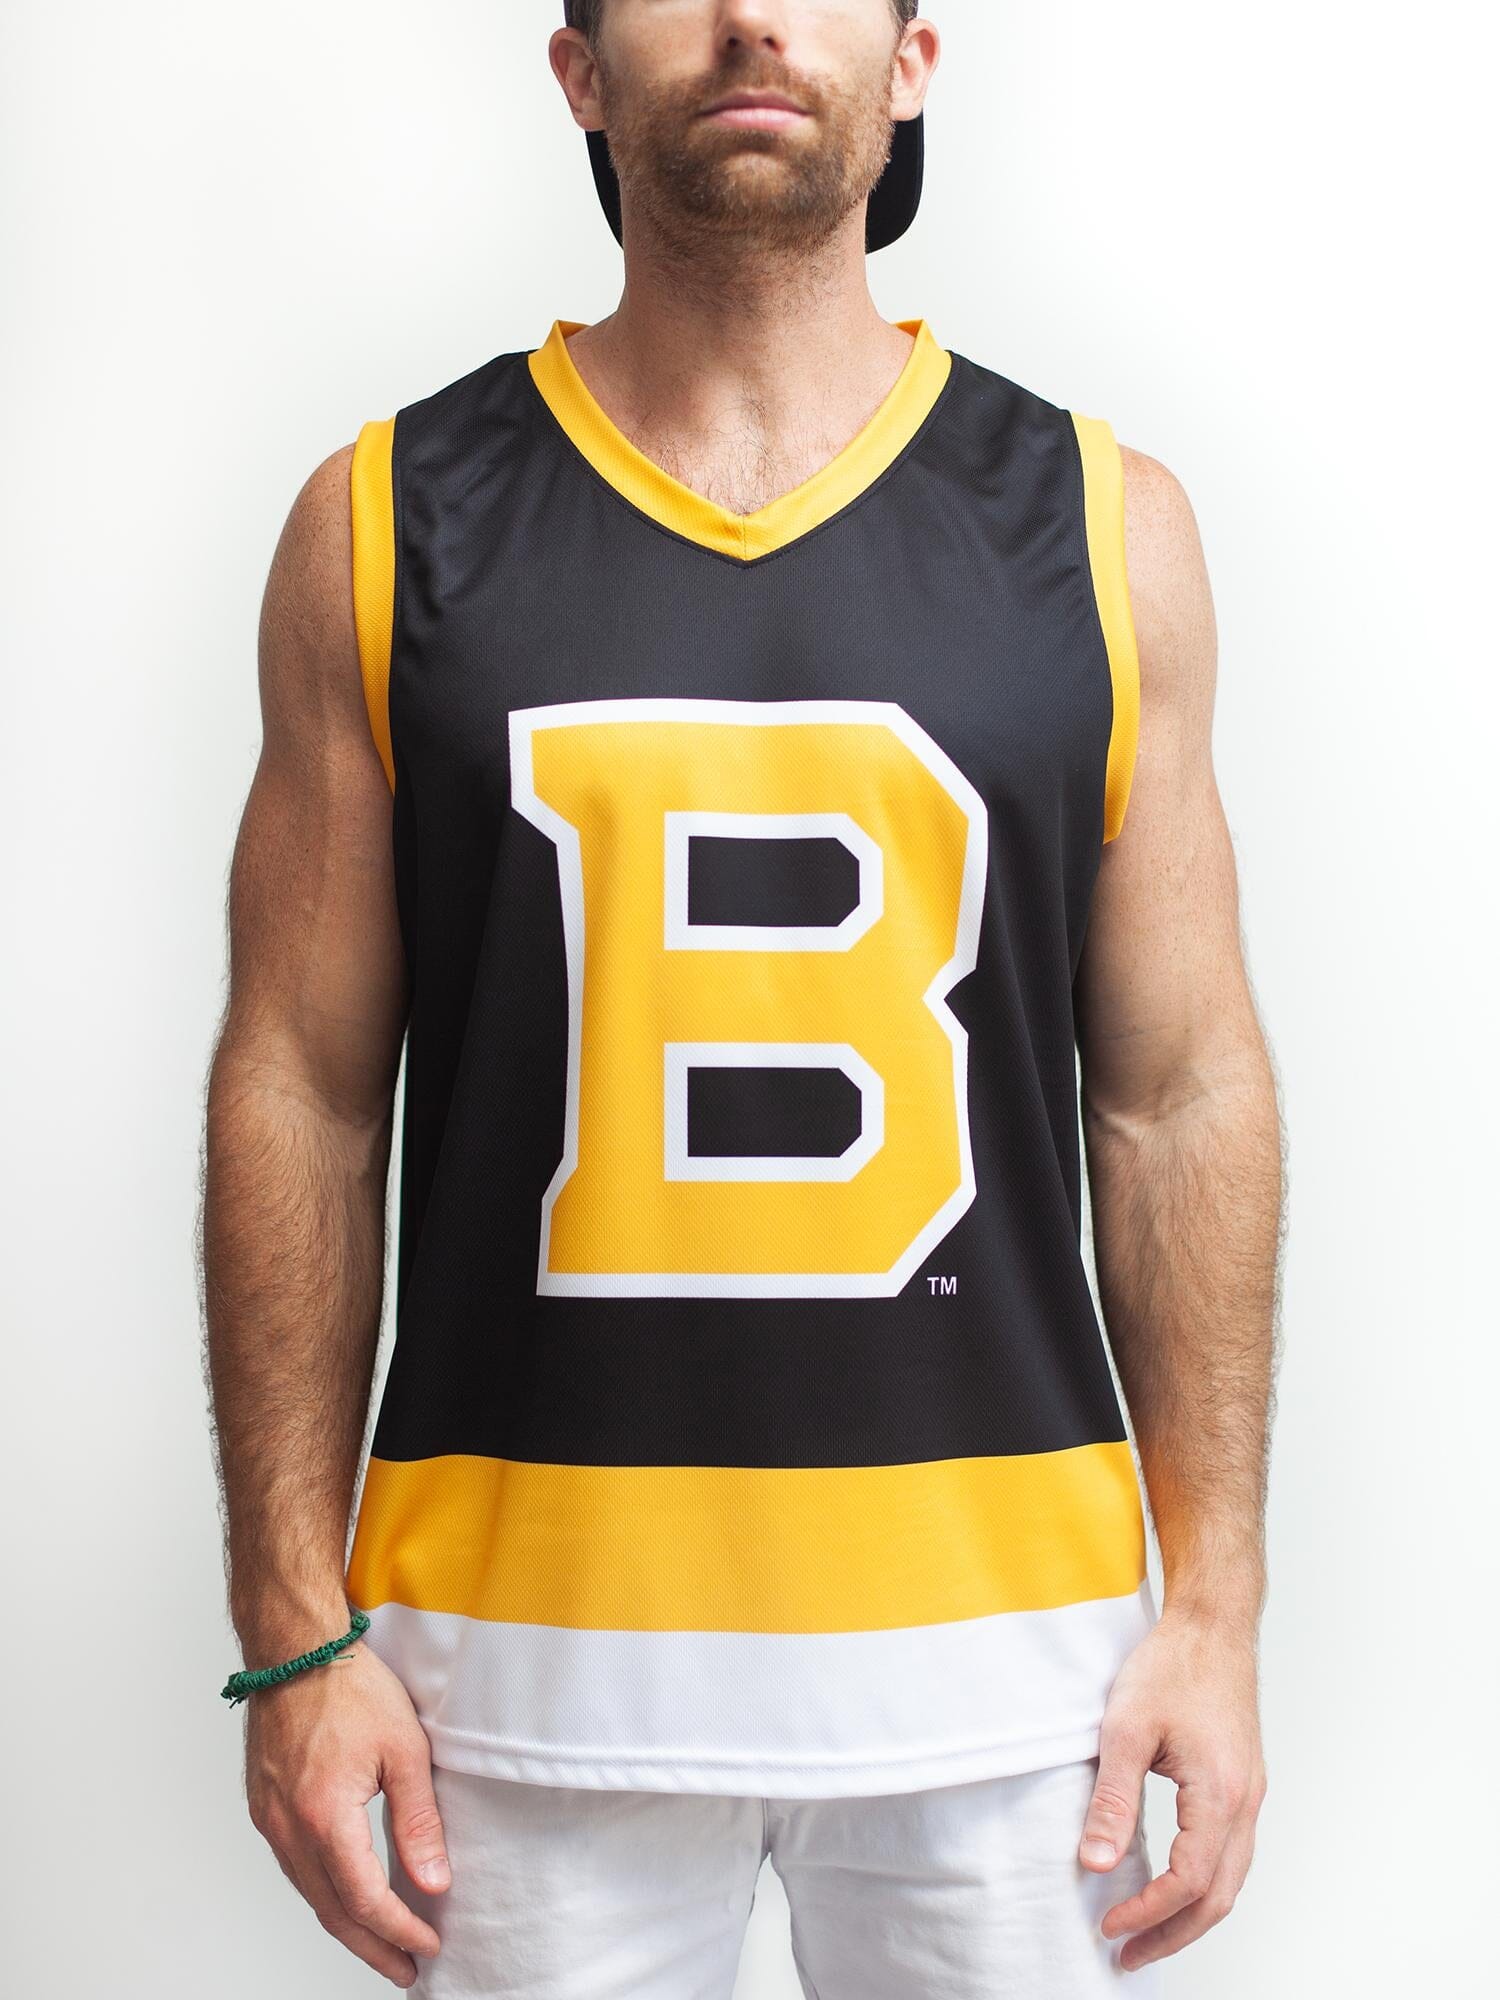 Bench Clearers Boston Bruins Away Hockey Tank - M / White / Polyester